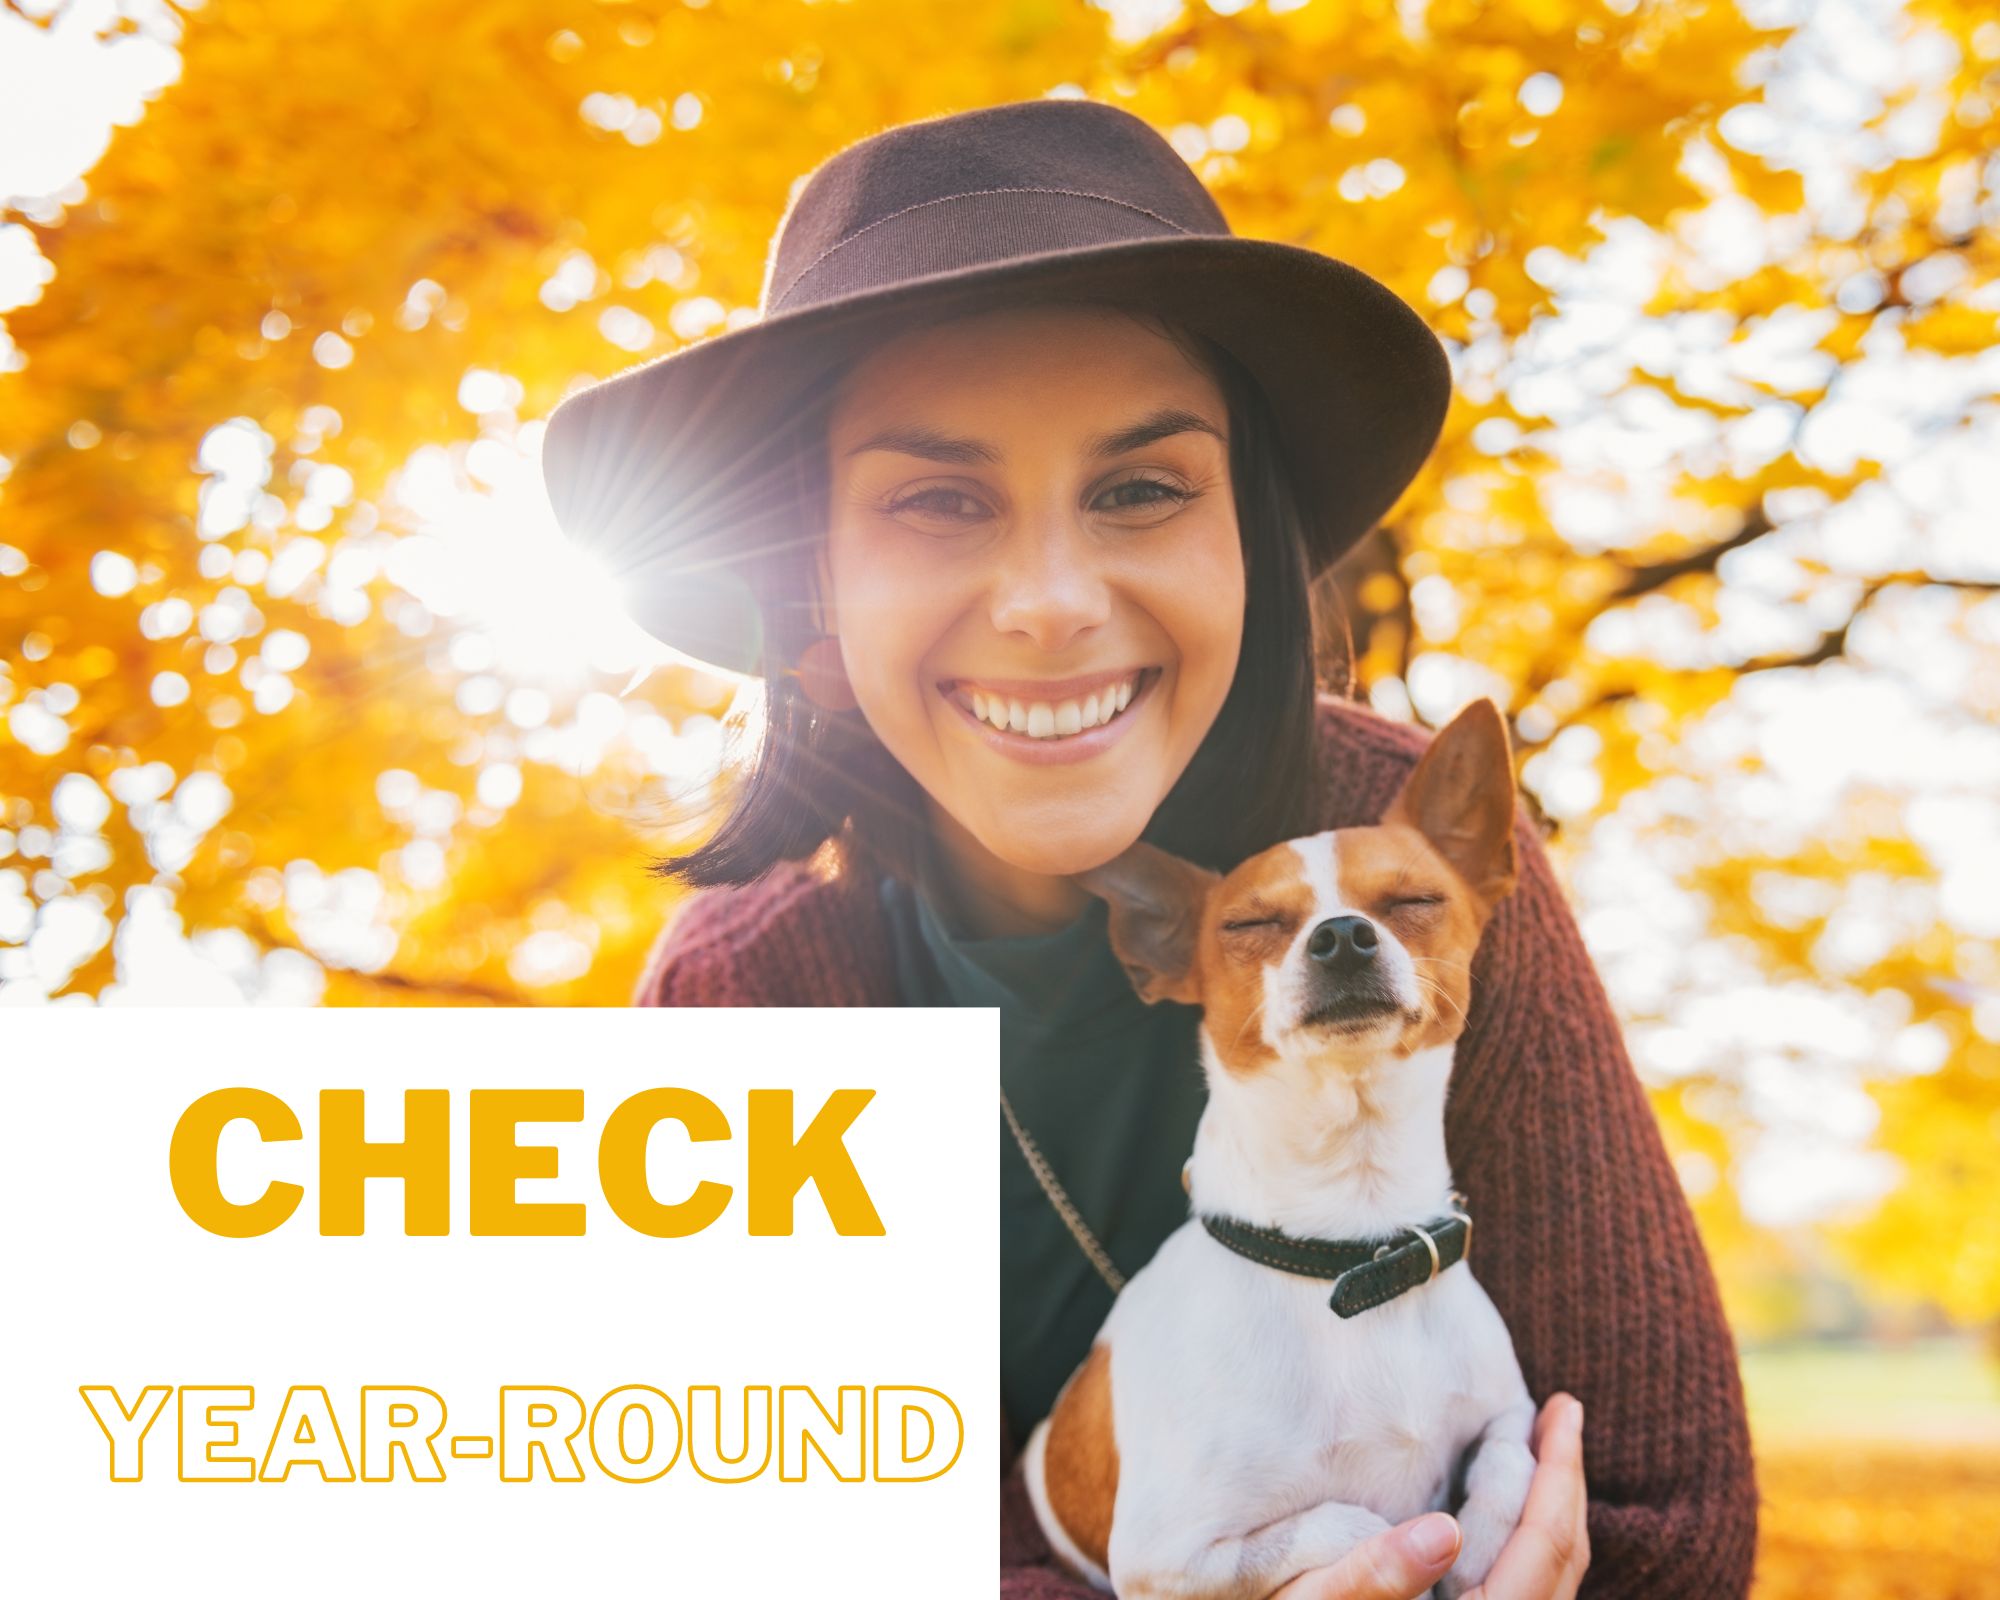 Leafy golden fall tree in background with smiling woman in hat with small dog in foreground. Words 